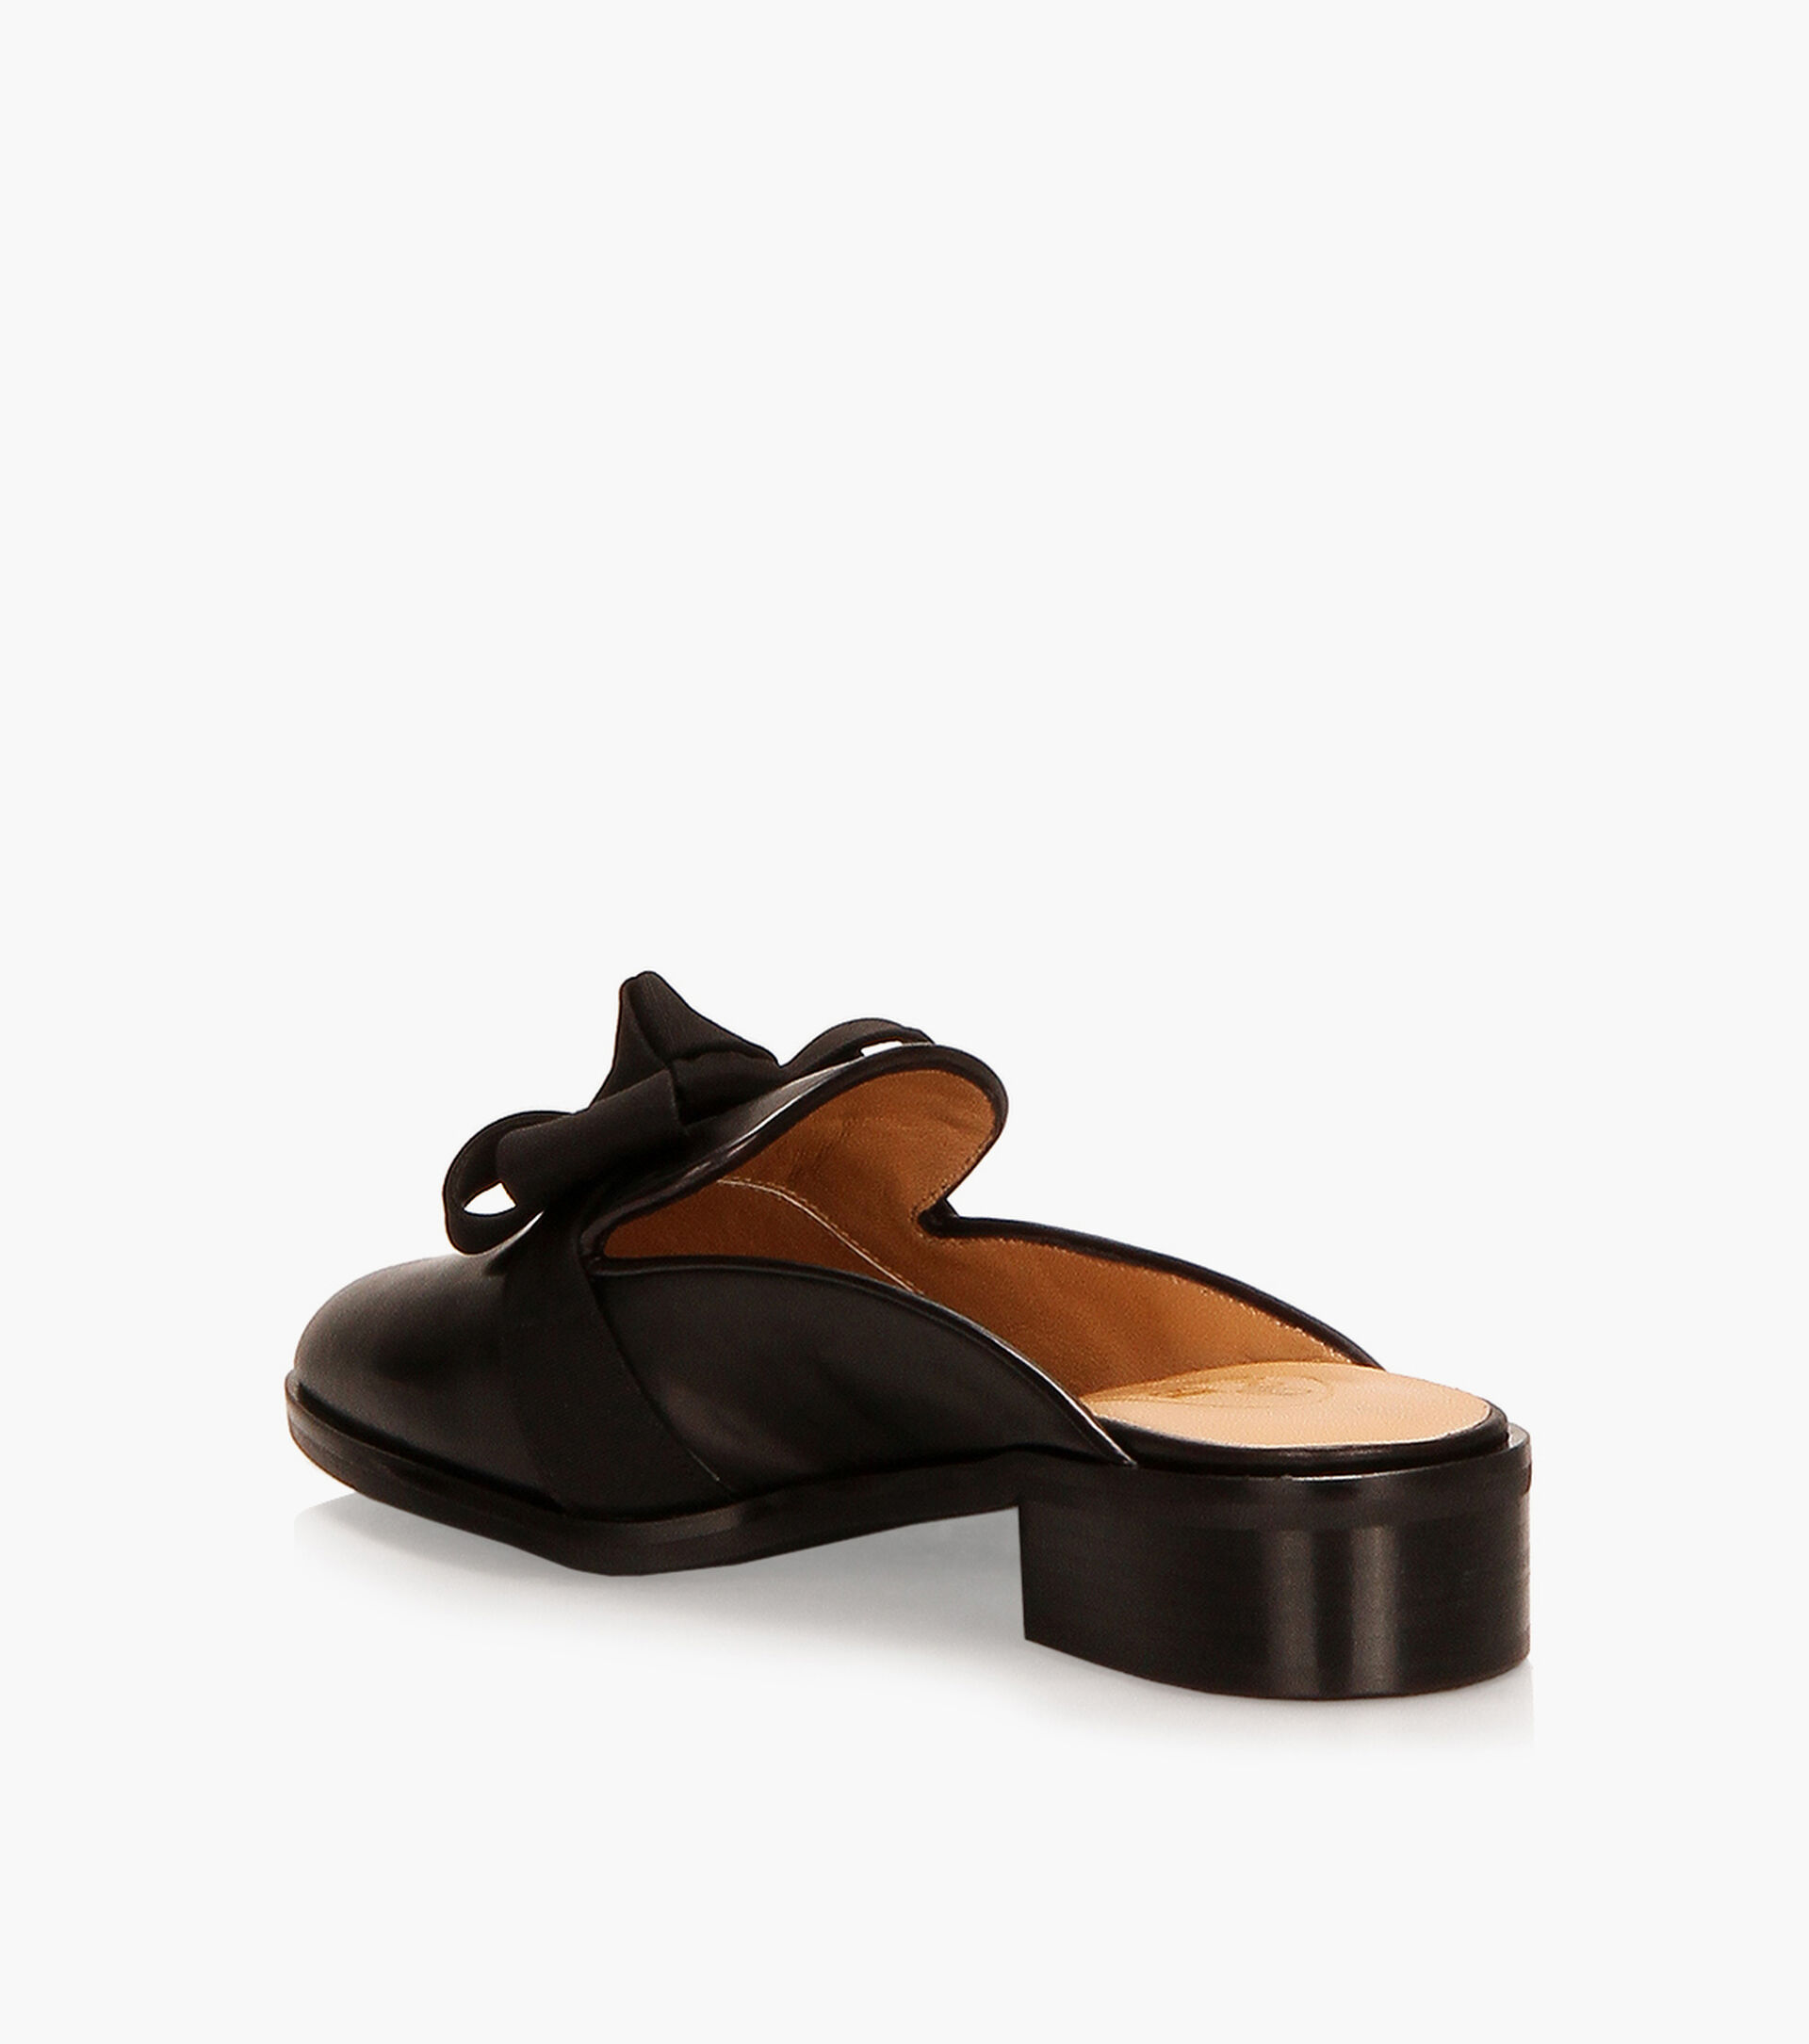 BROWNS COUTURE TIGERLILY - Black Leather | Browns Shoes